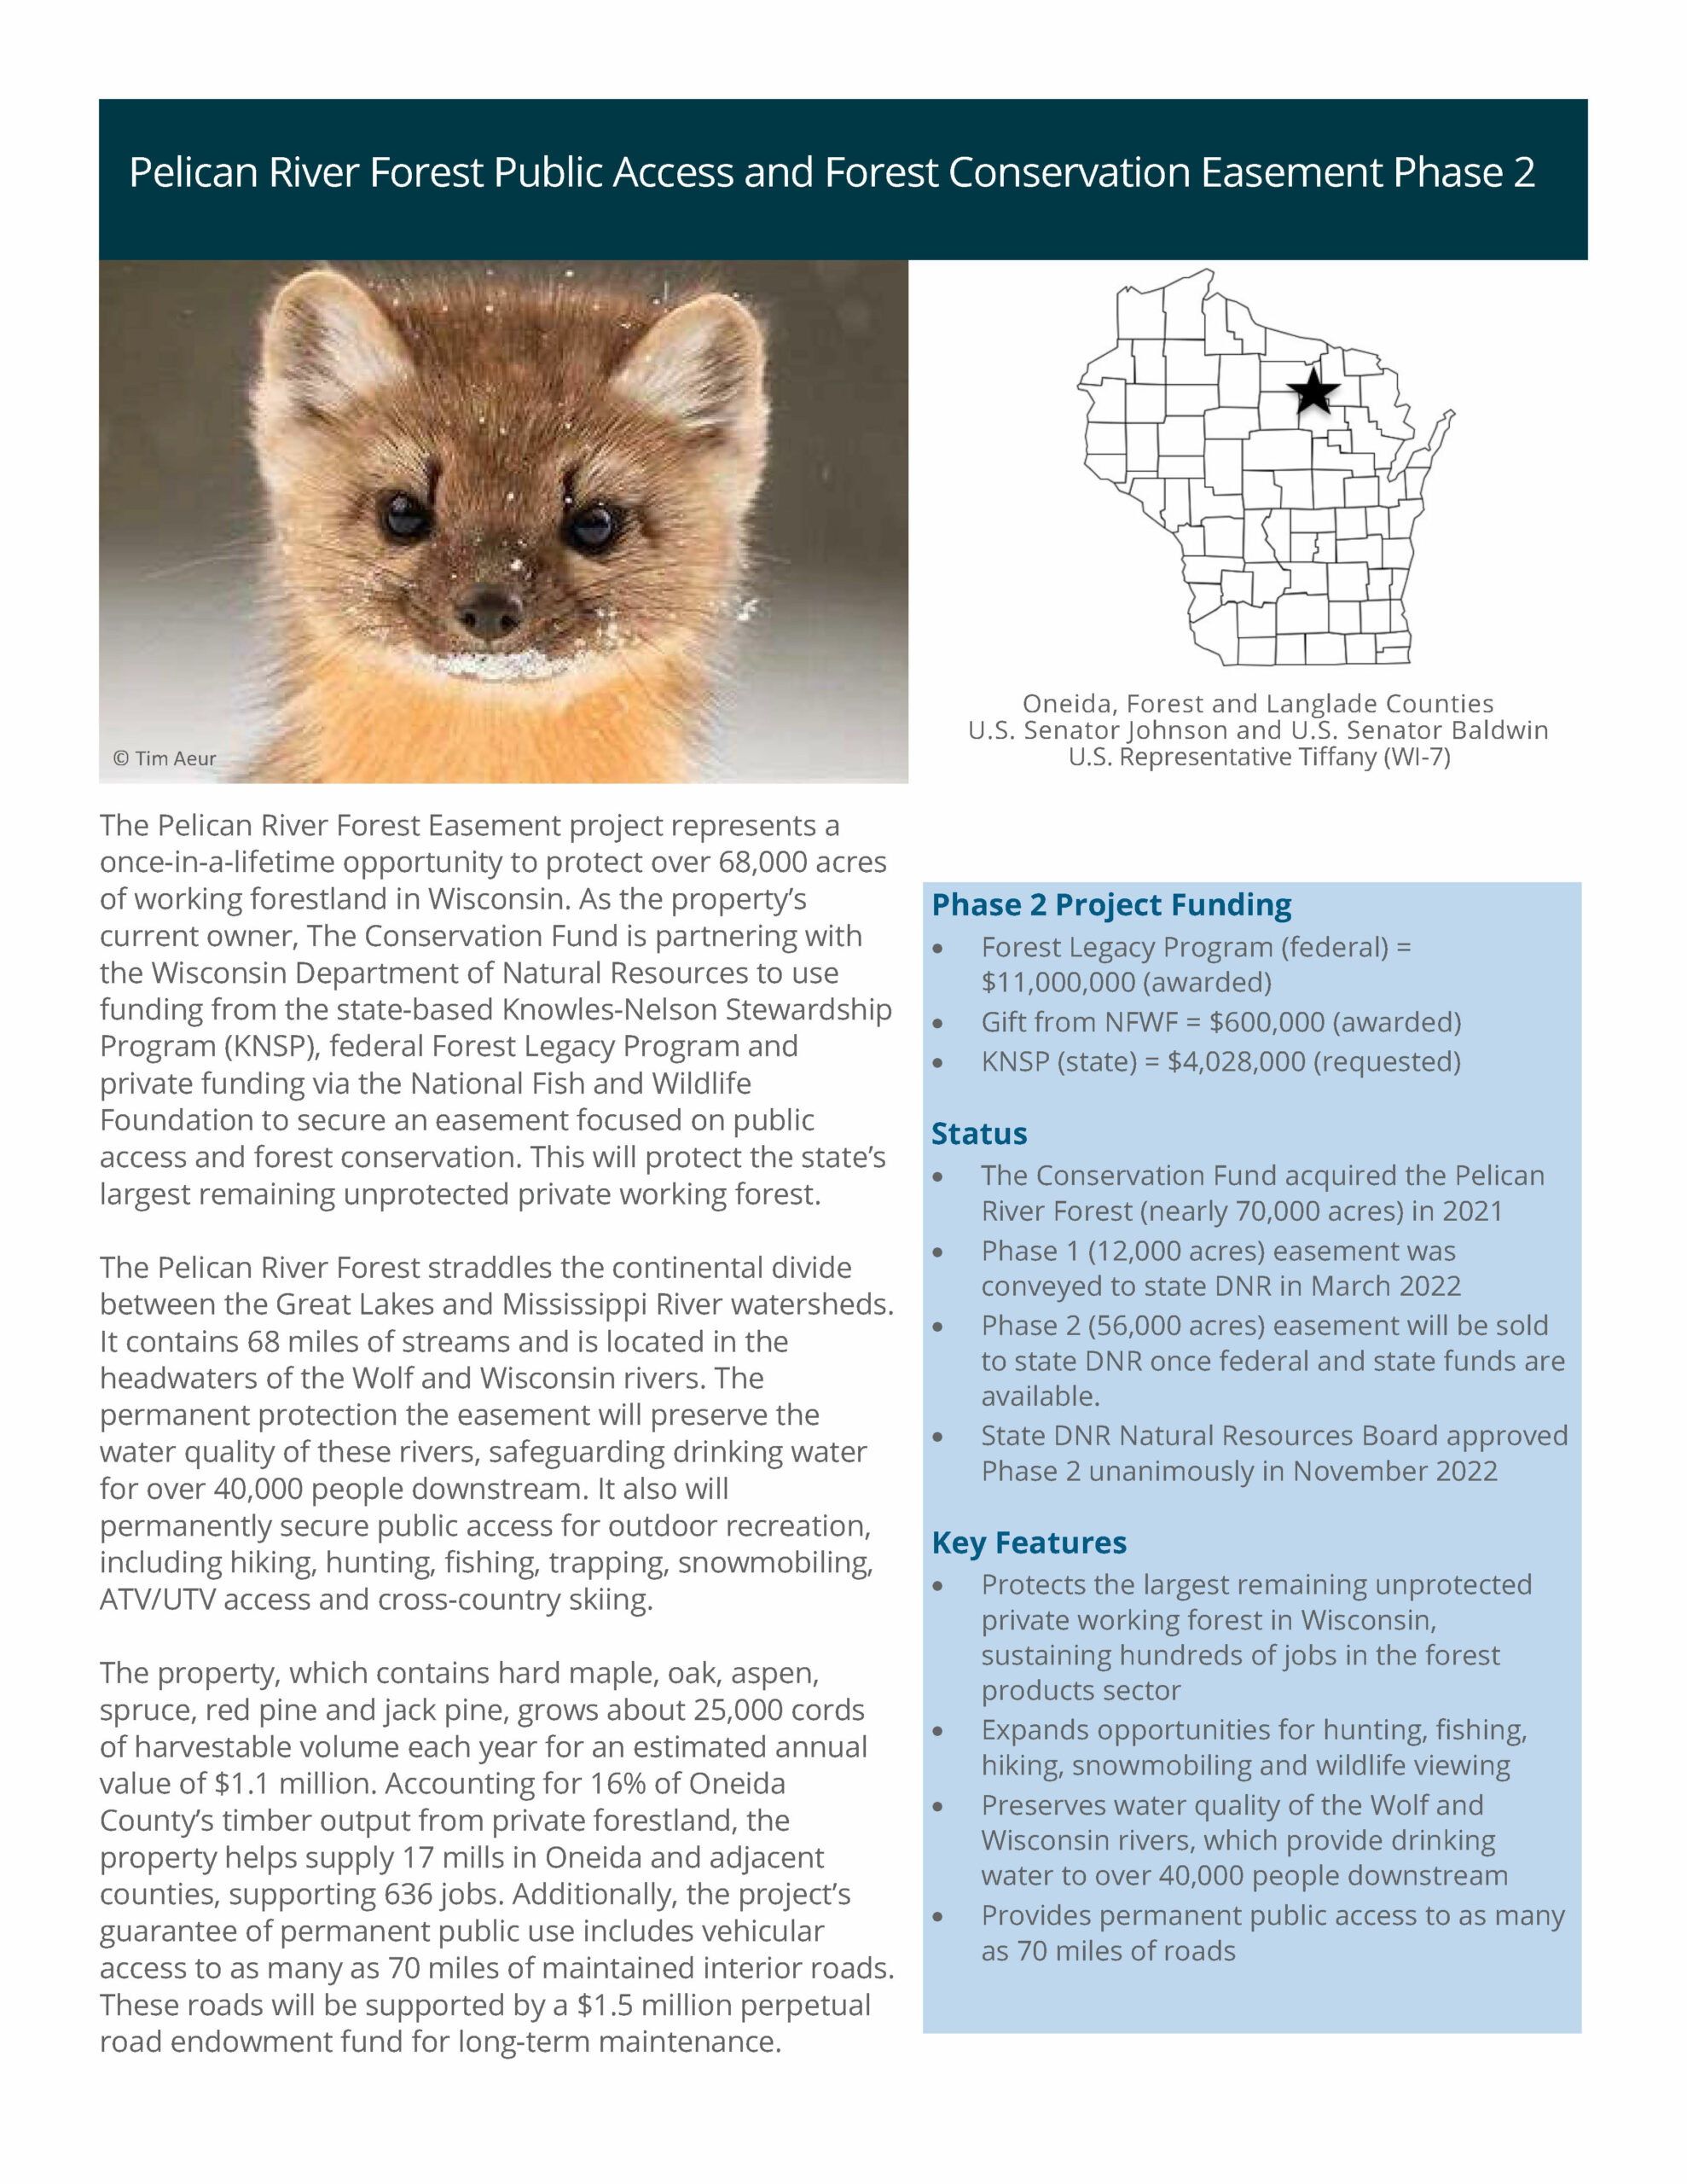 Cover of a fact sheet document featuring a close up photograph of an American marten and a map of Wisconsin, highlighting Oneida County